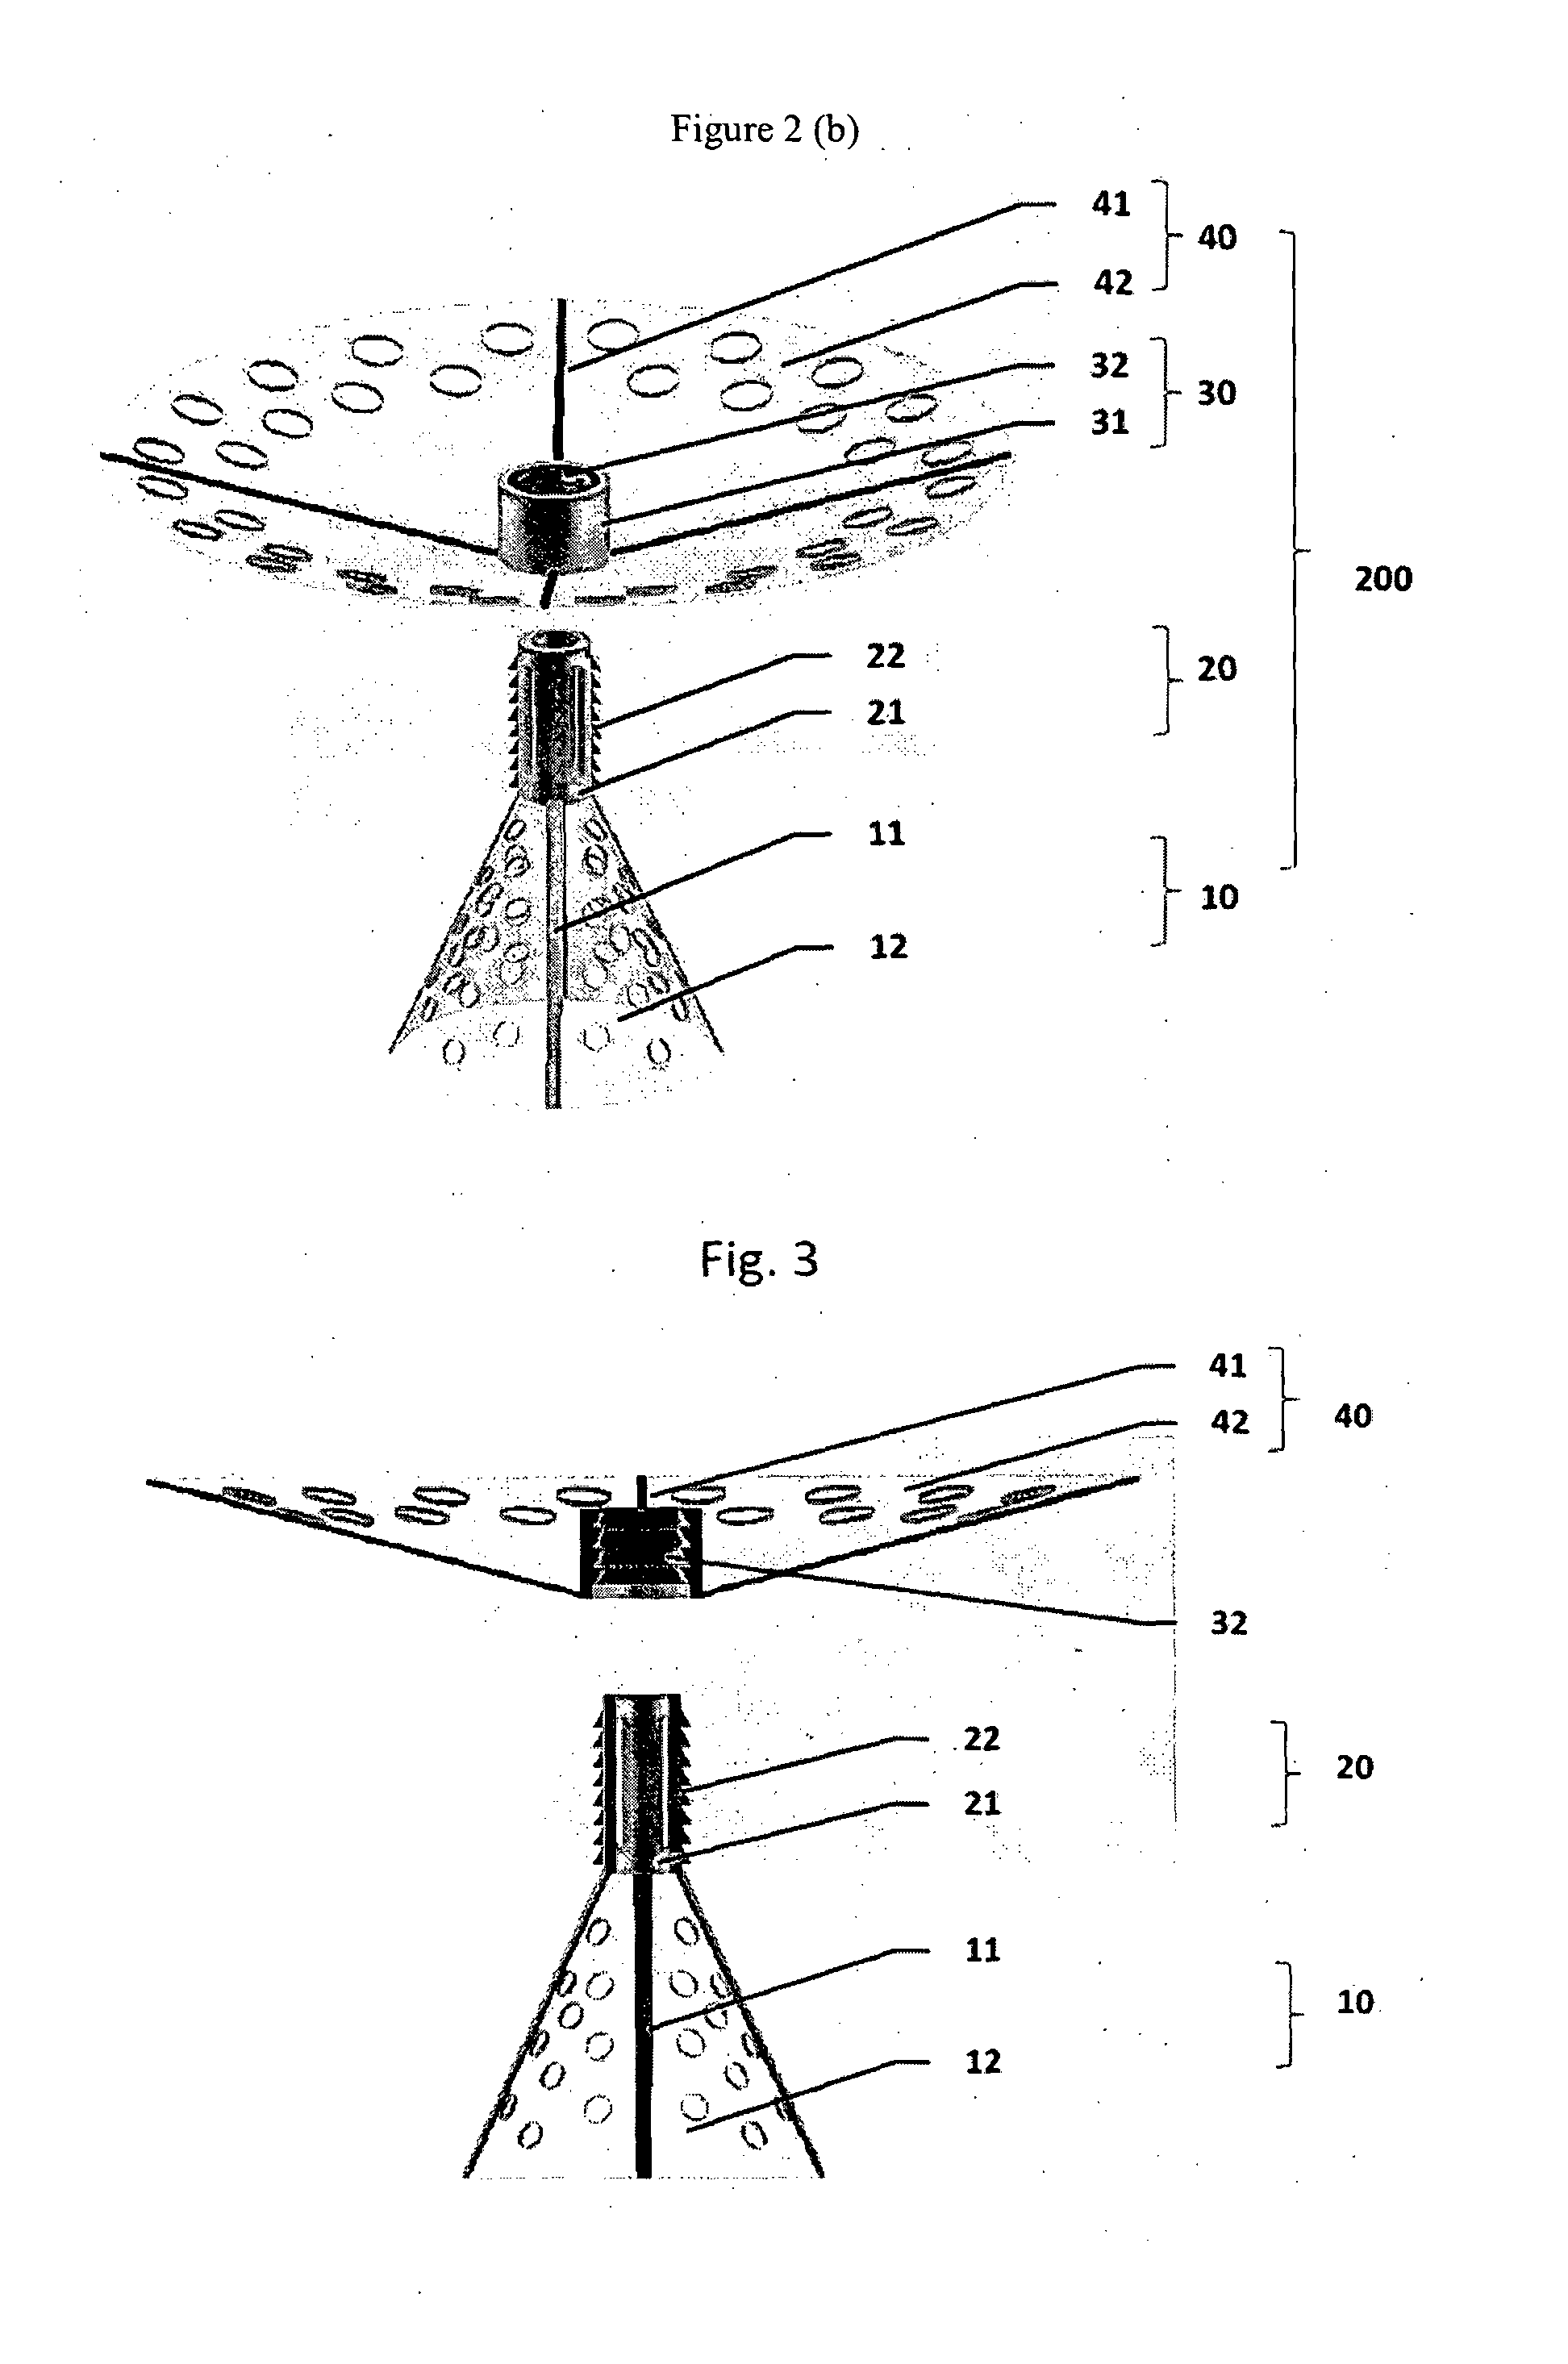 A device and method for forming an anastomotic joint between two parts of a body